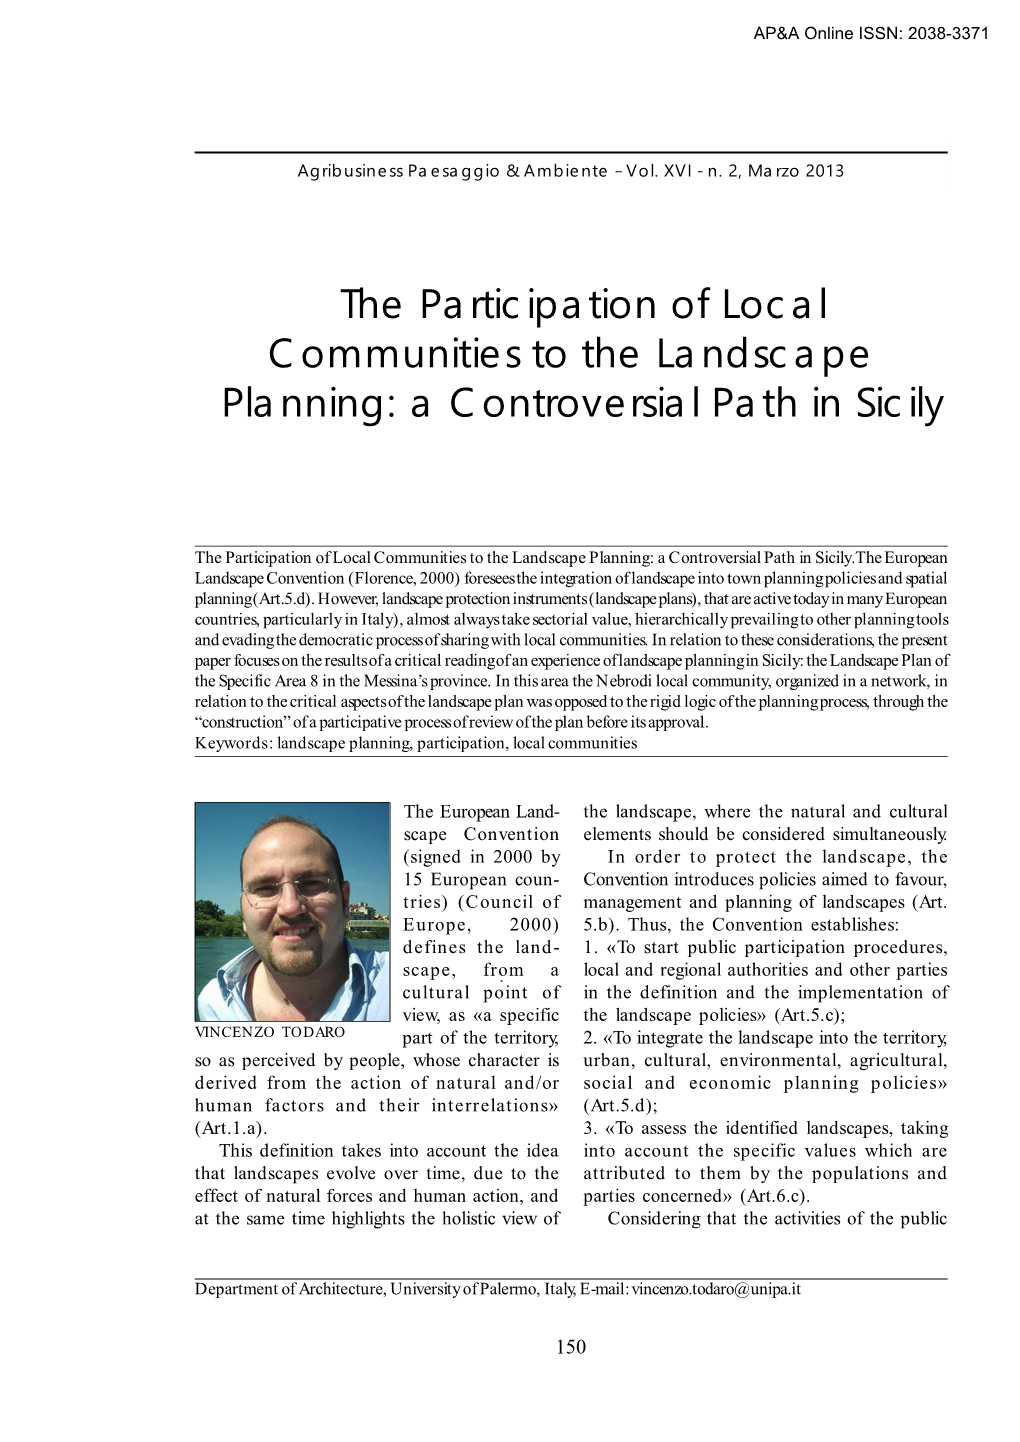 The Participation of Local Communities to the Landscape Planning: a Controversial Path in Sicily